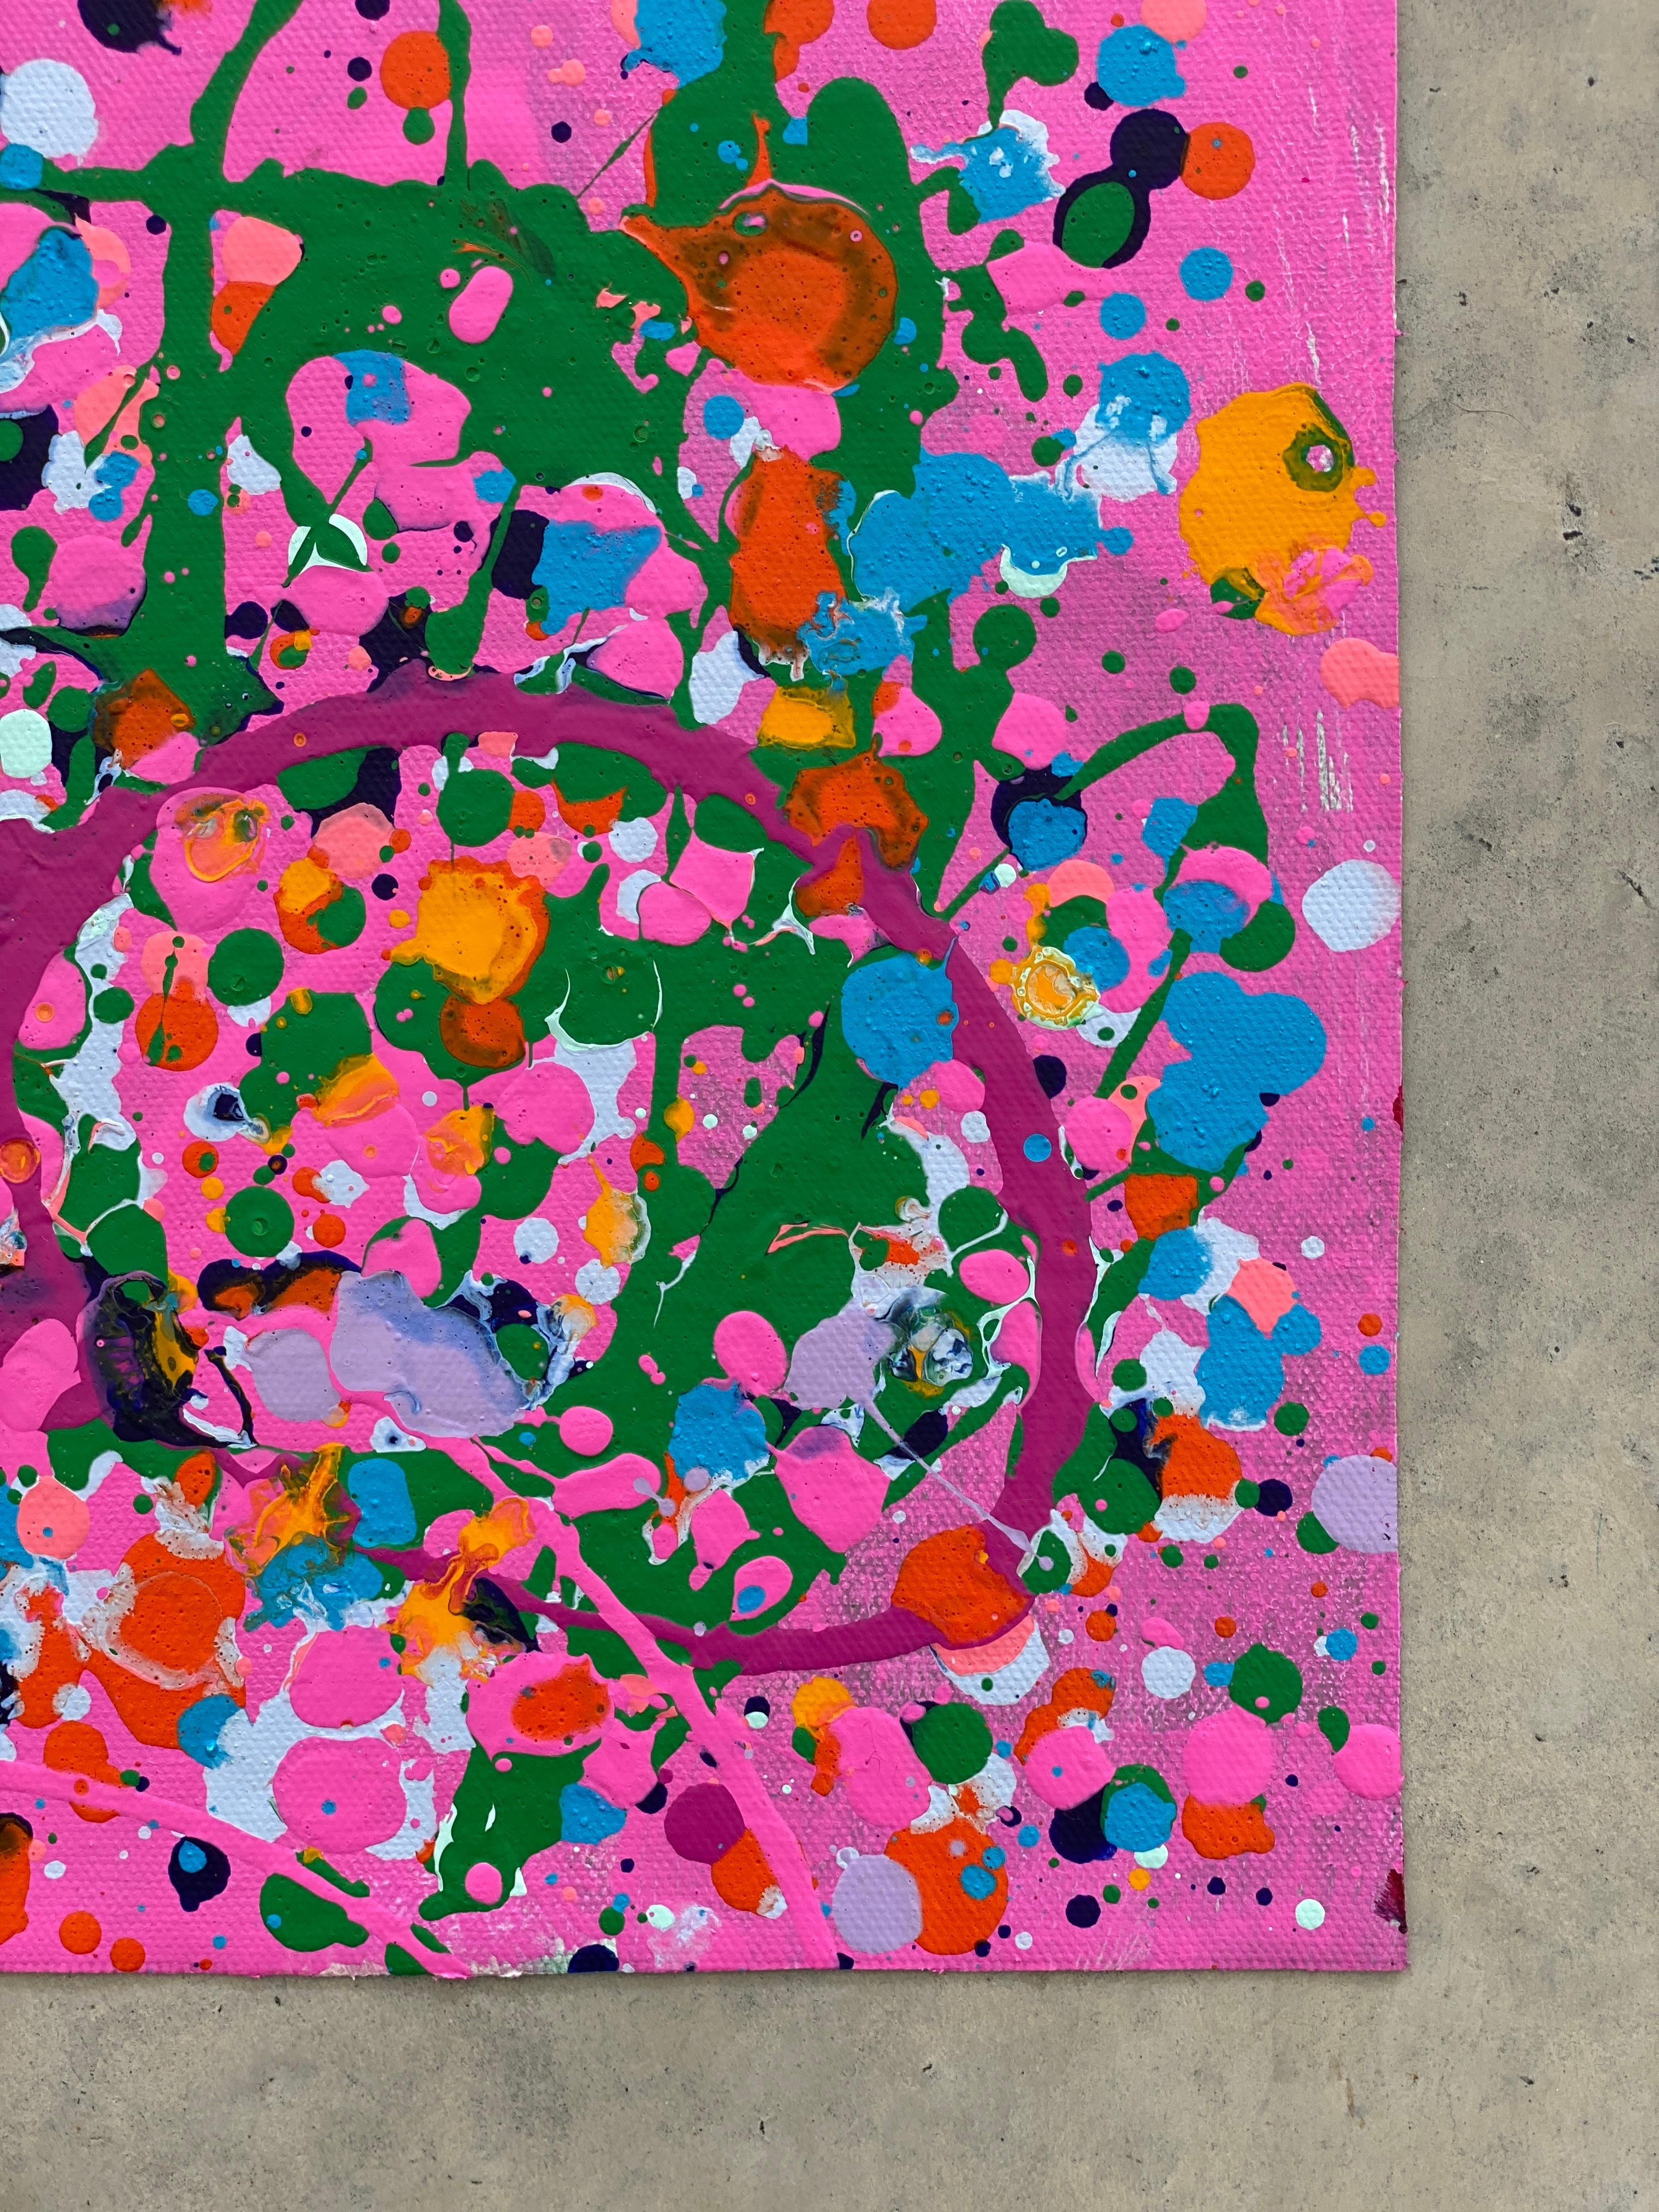 Colorful spatter no7 drip abstract expressionist Jackson Pollock pink green blue 2